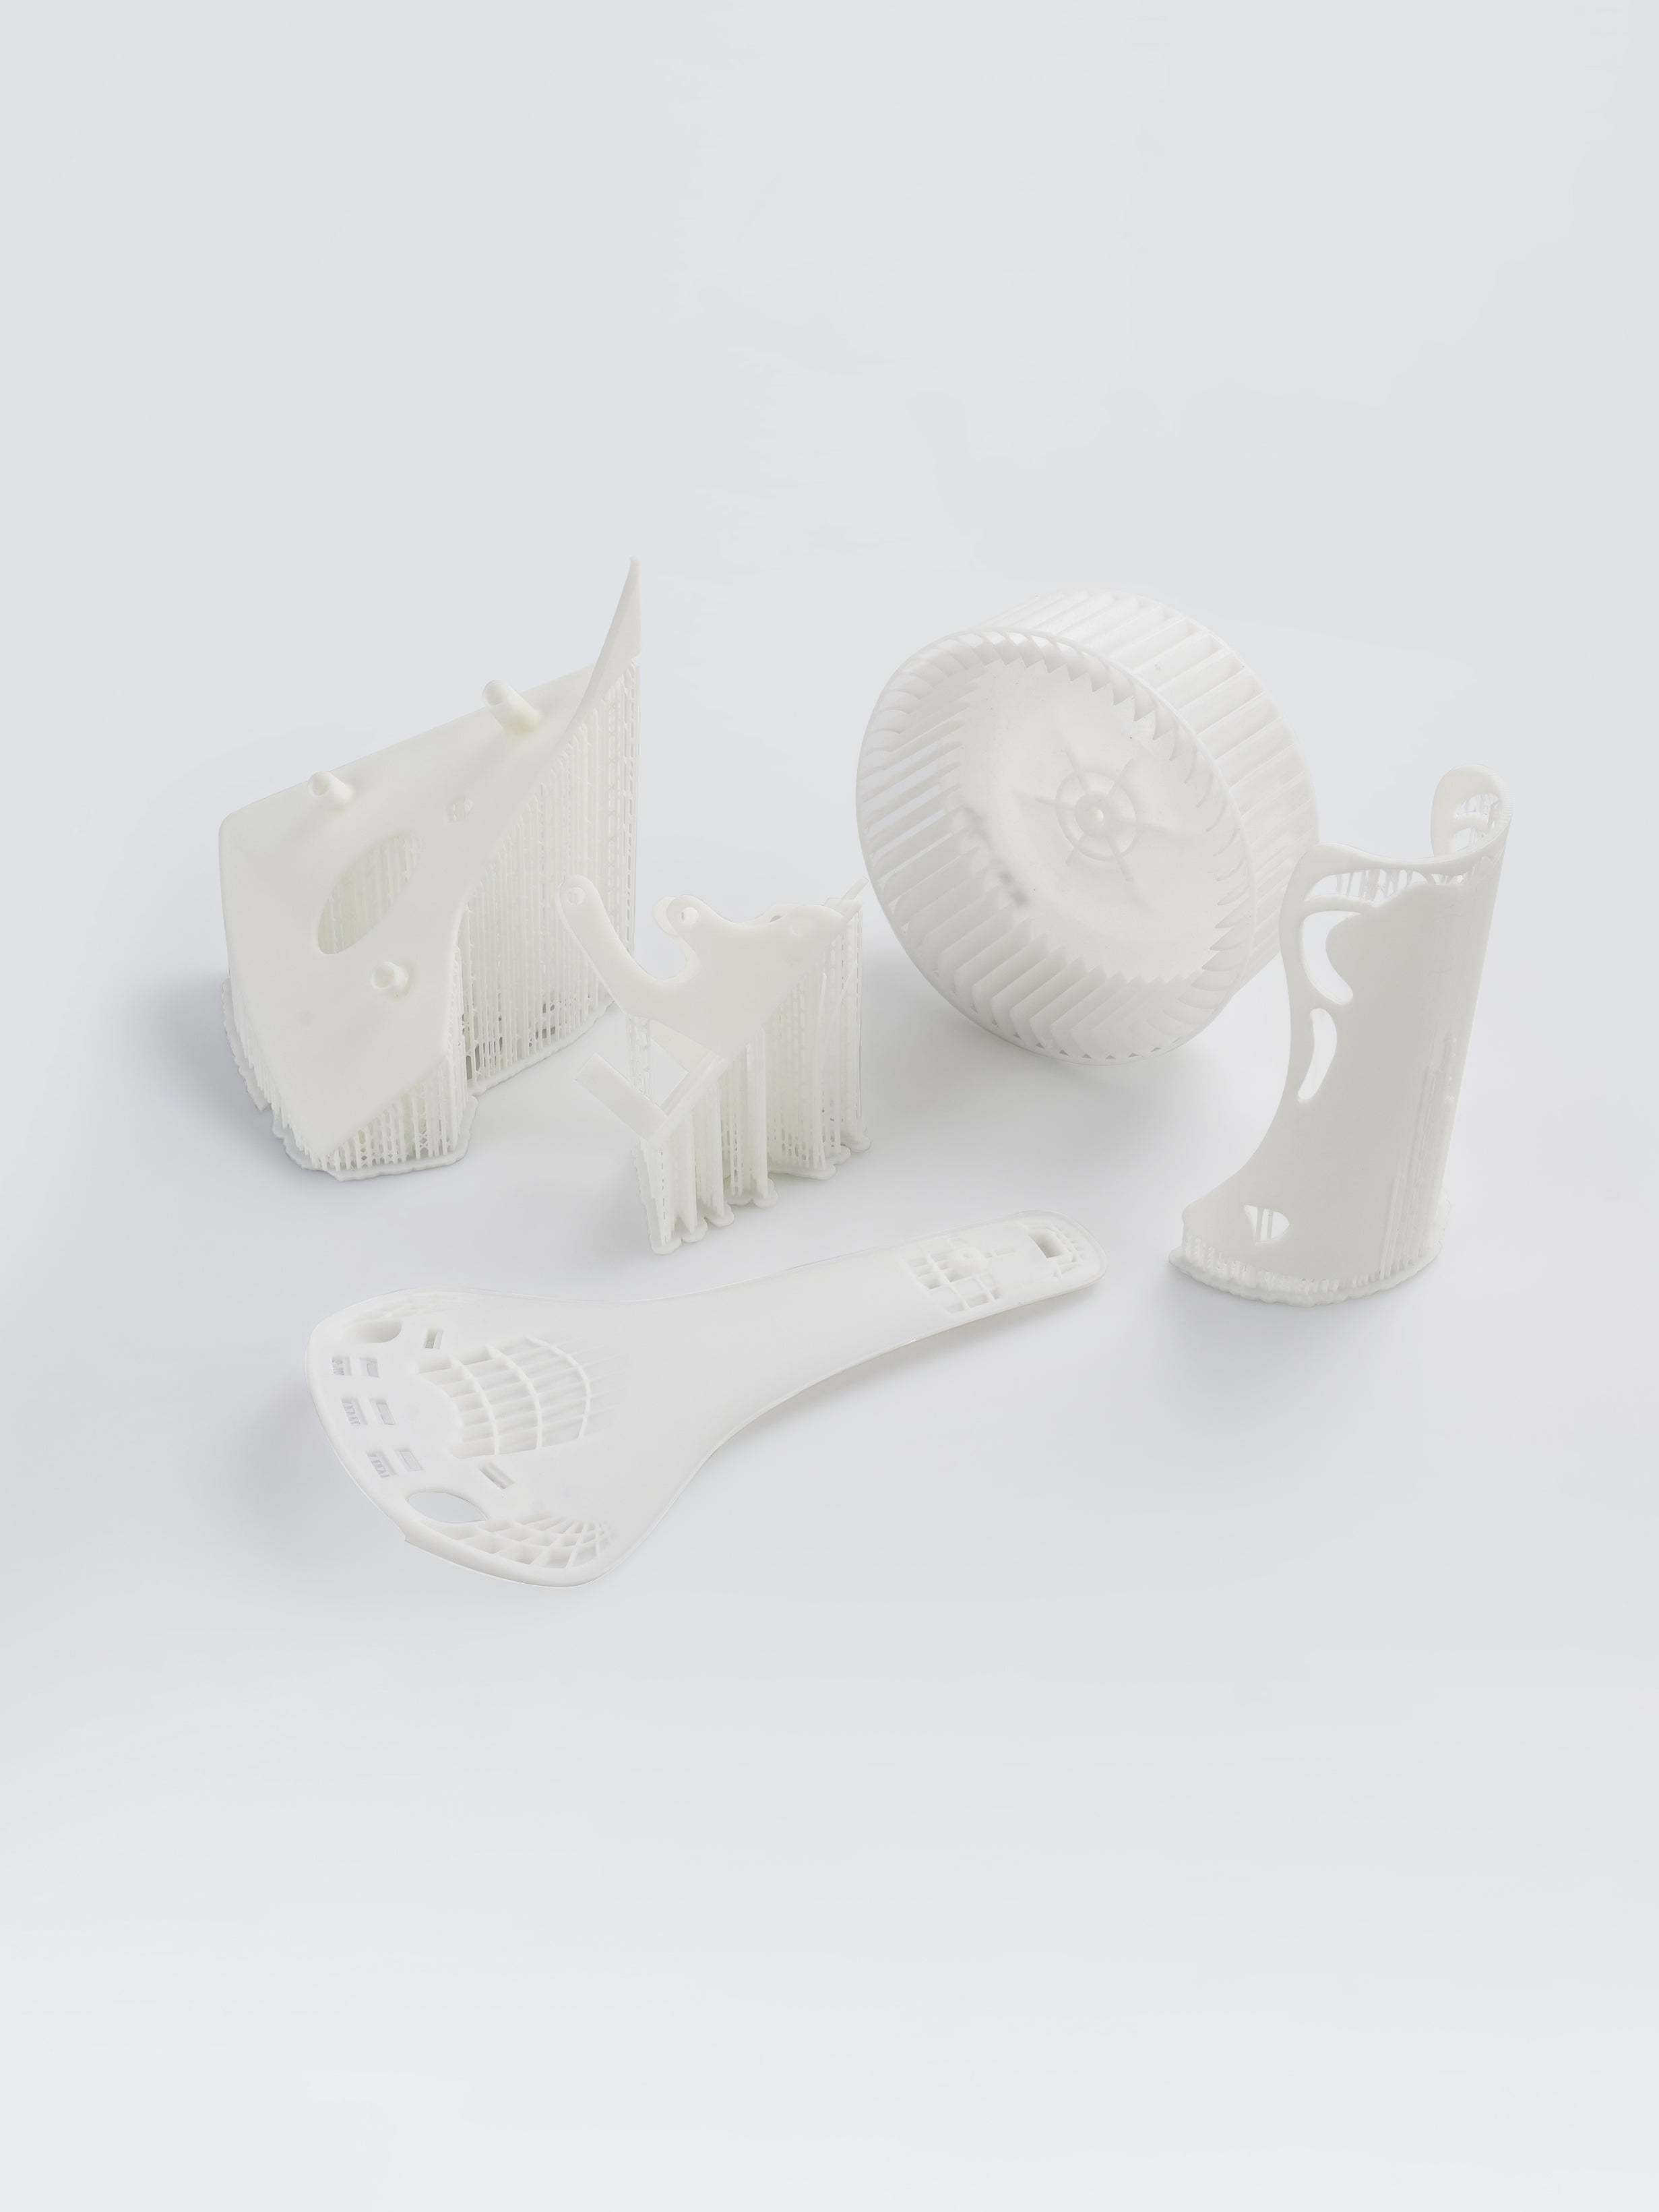 Advanced 3D Printing for High-Quality Manufacturing | Martrix